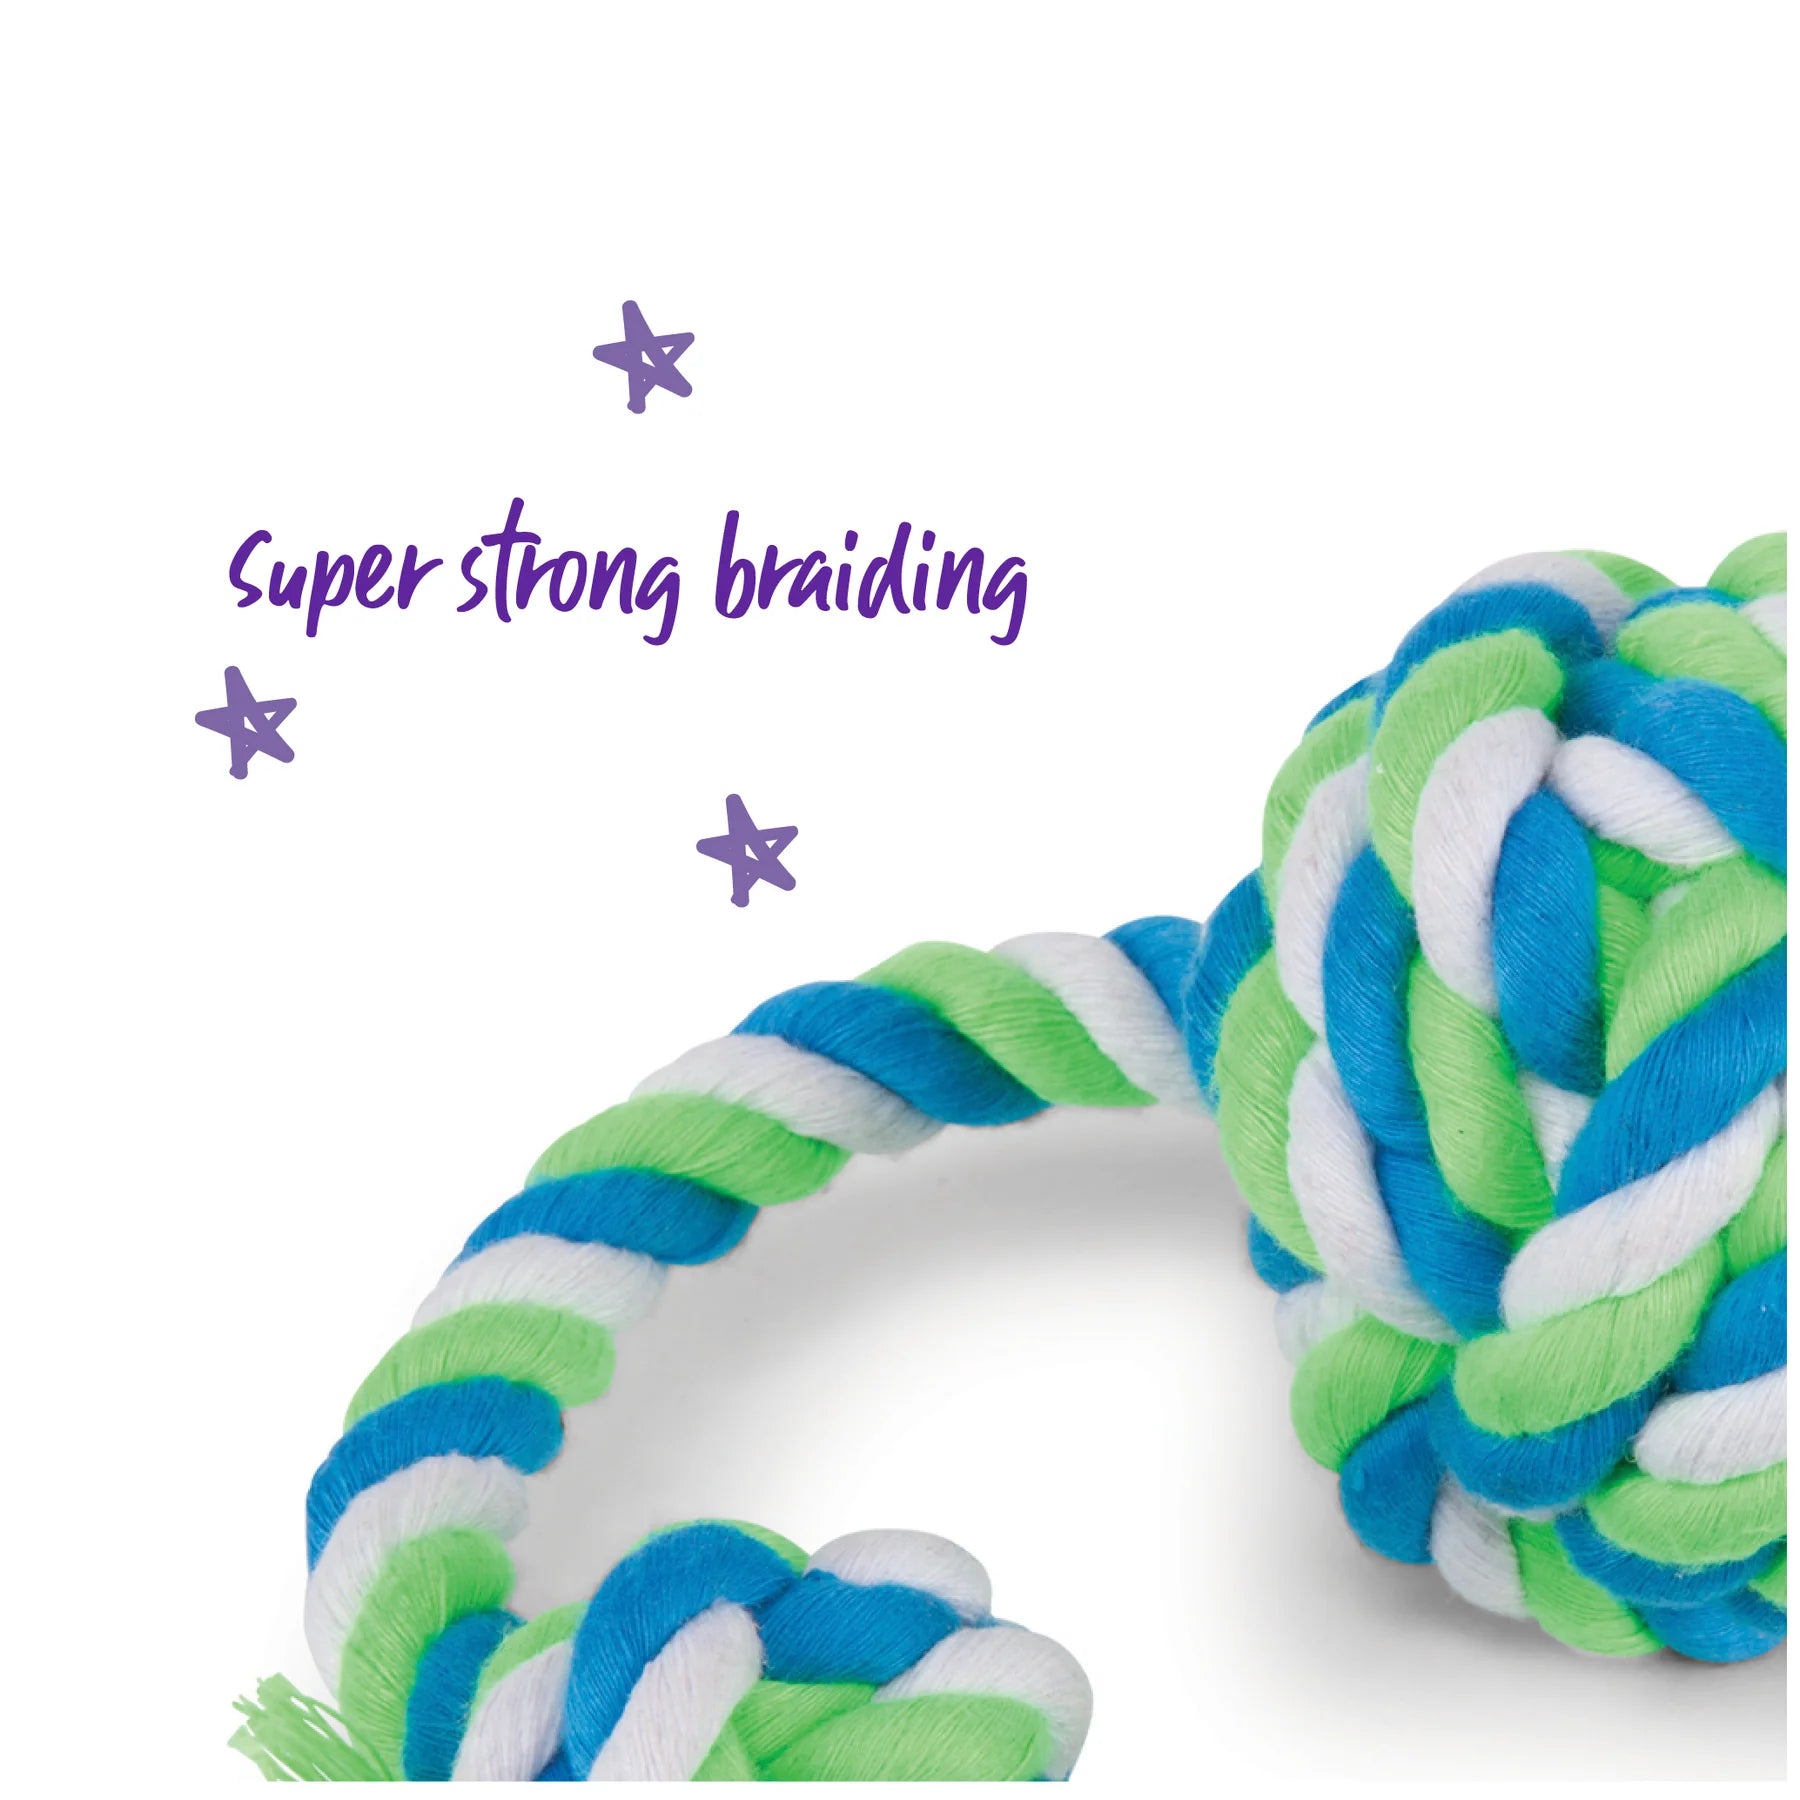 Twisted Rope Sling Knot Ball